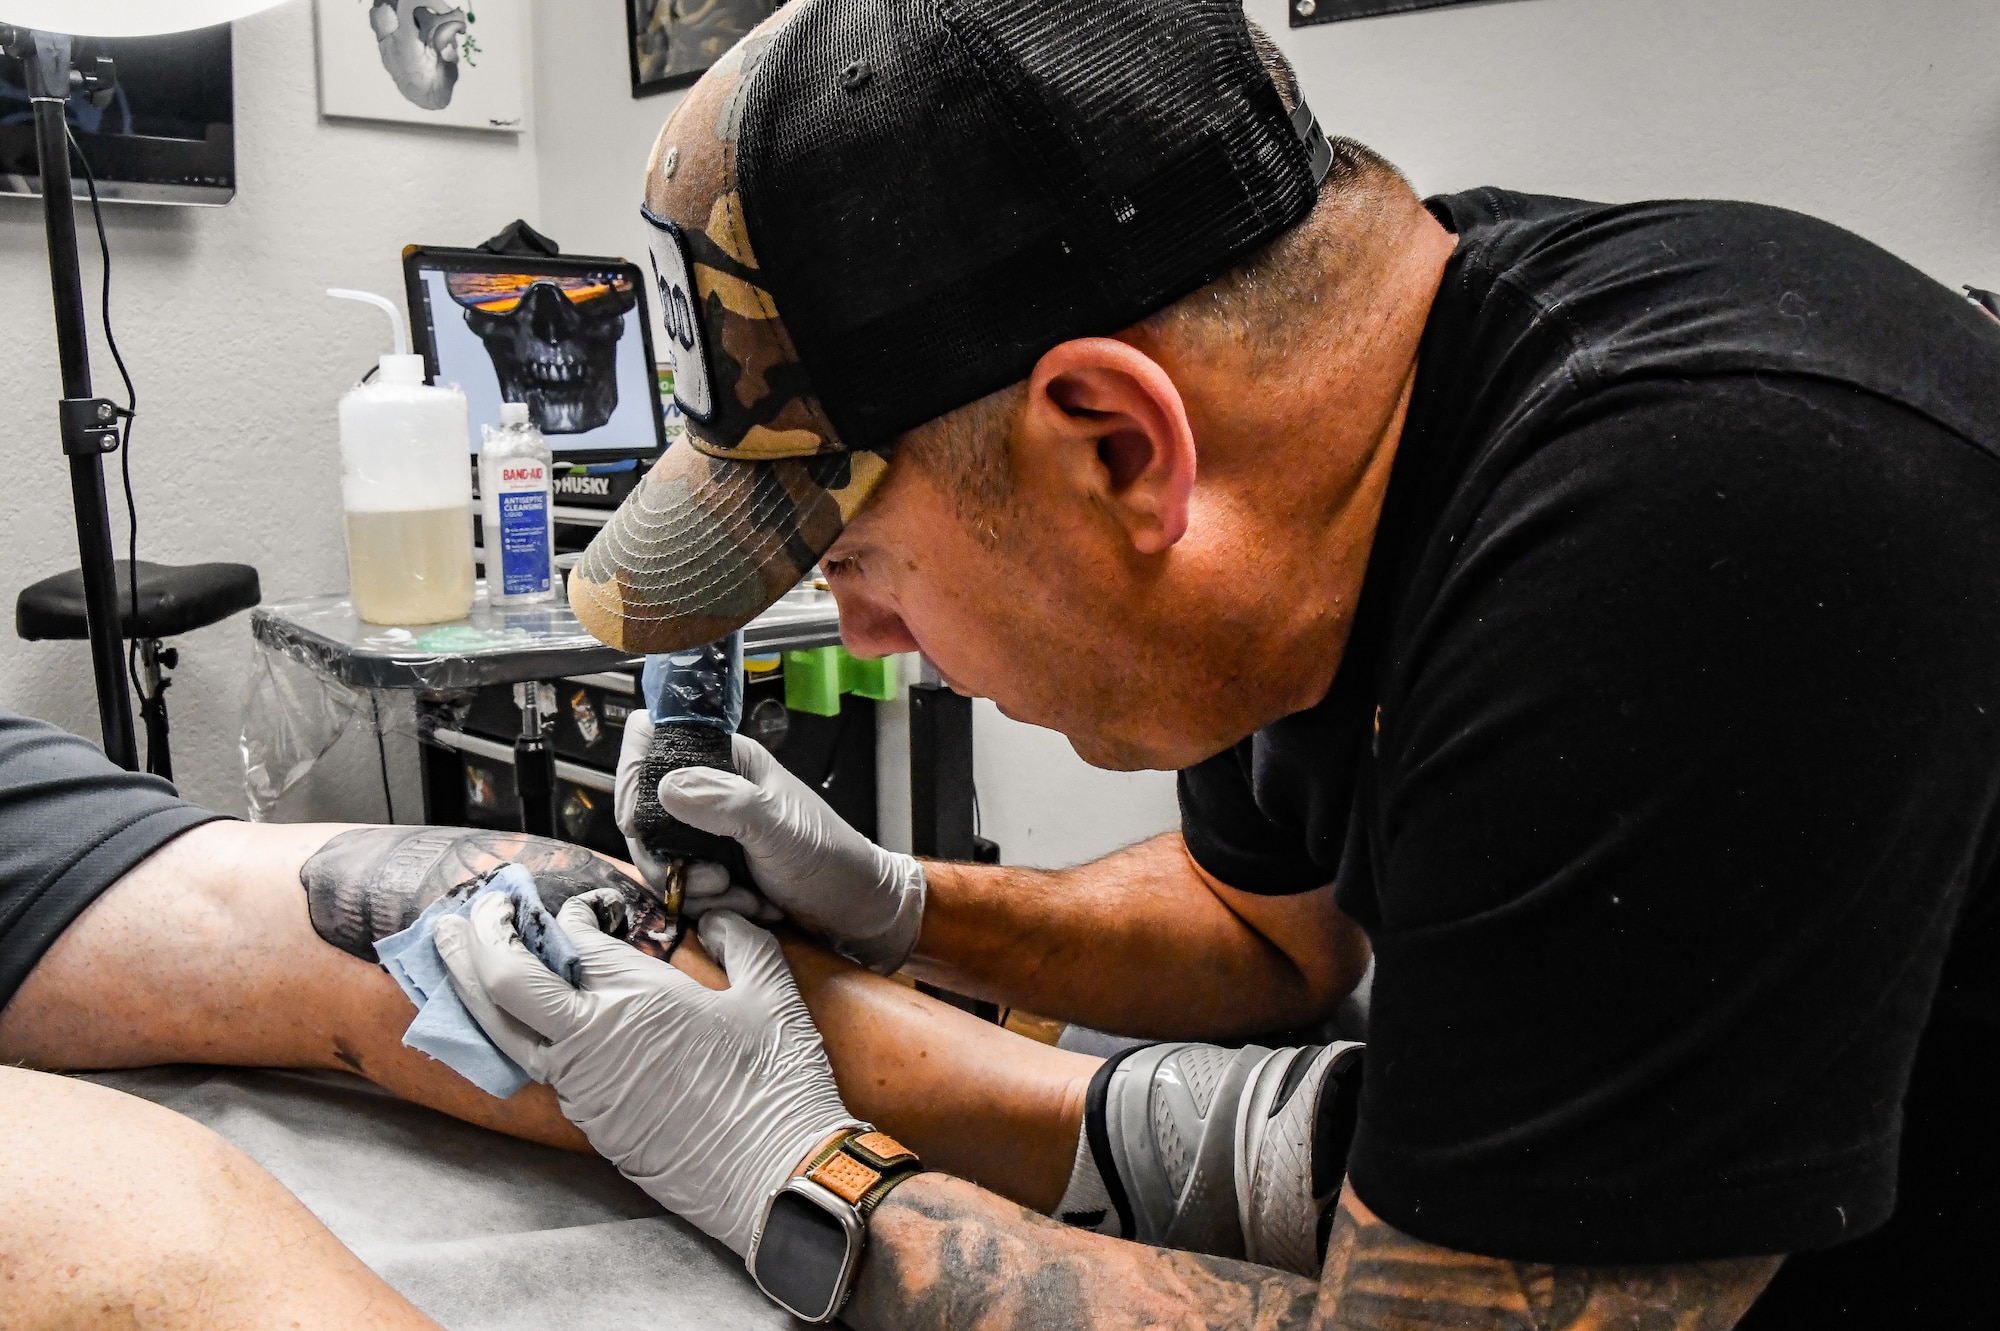 U.S. Air Force Chief Master Sgt. George Bender, 168th Aircraft Maintenance Squadron Chief, tattoos Brian Dianoski, Fairbanks resident, at  at a local tattoo shop in Fairbanks.